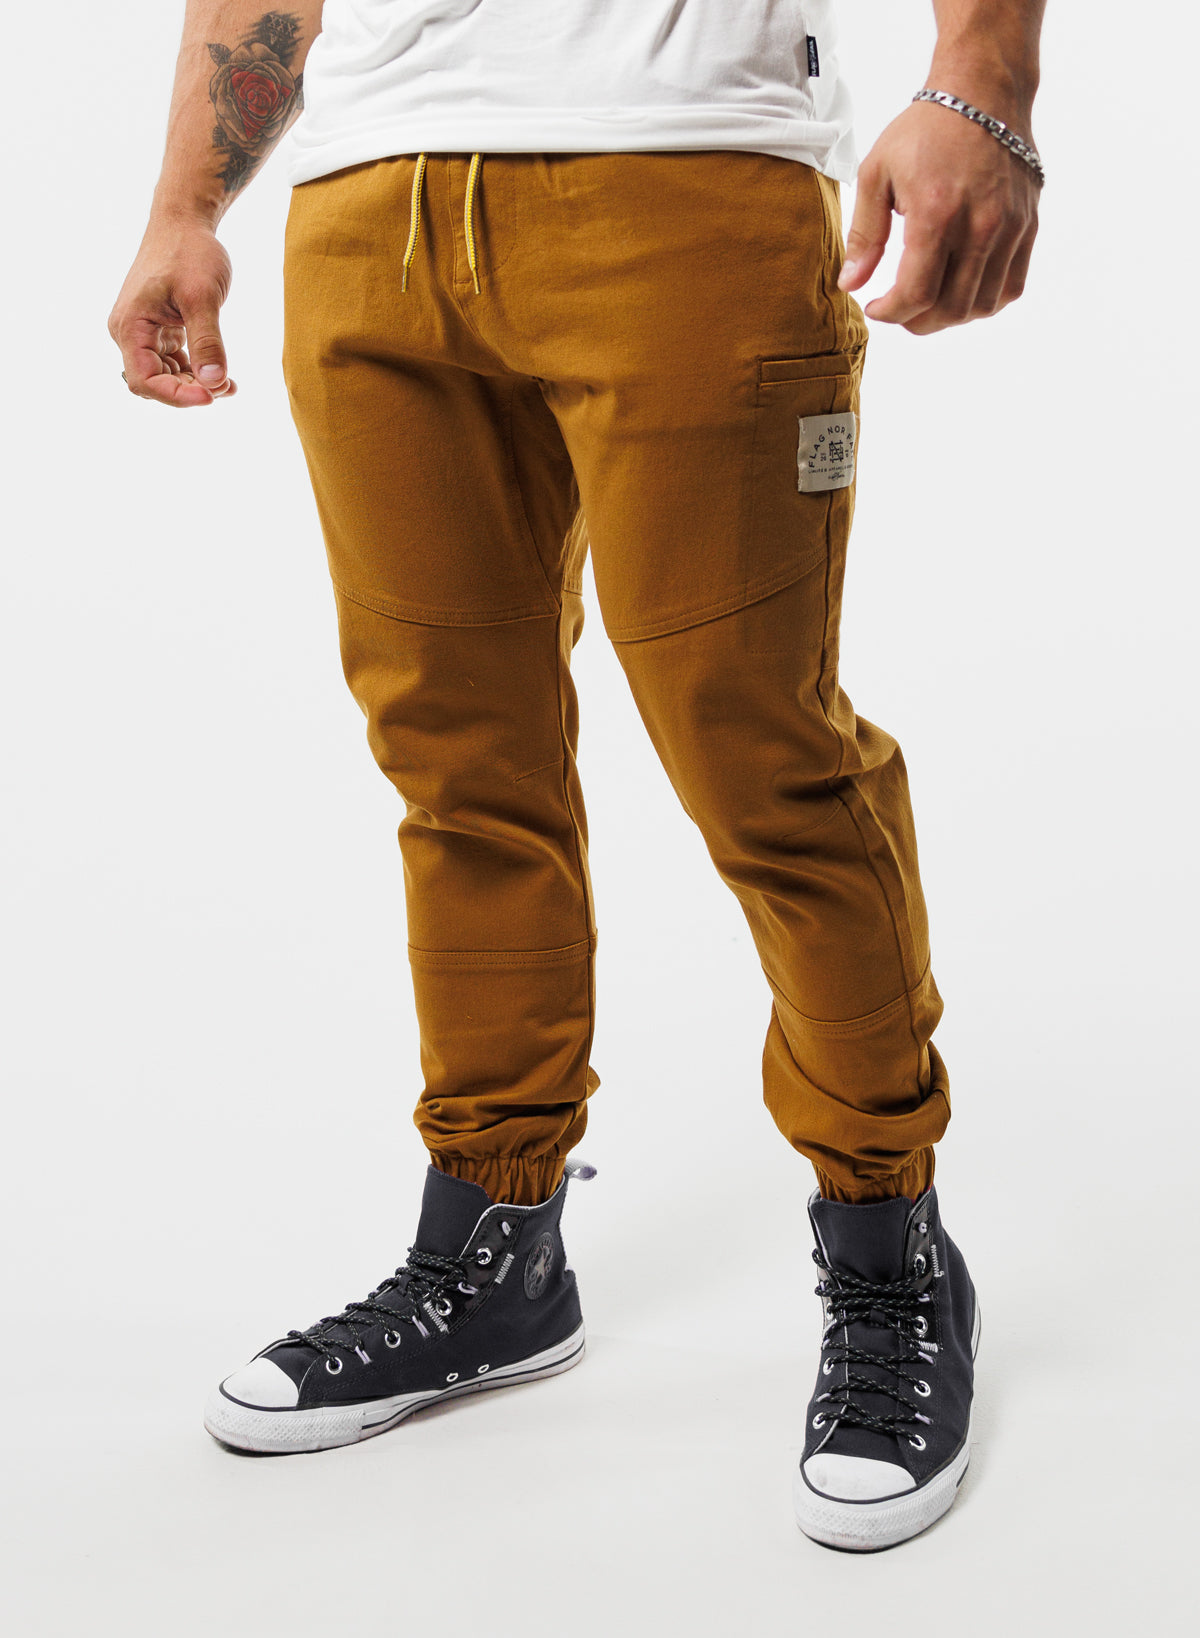 JOGGERS FOREVER - MADERA